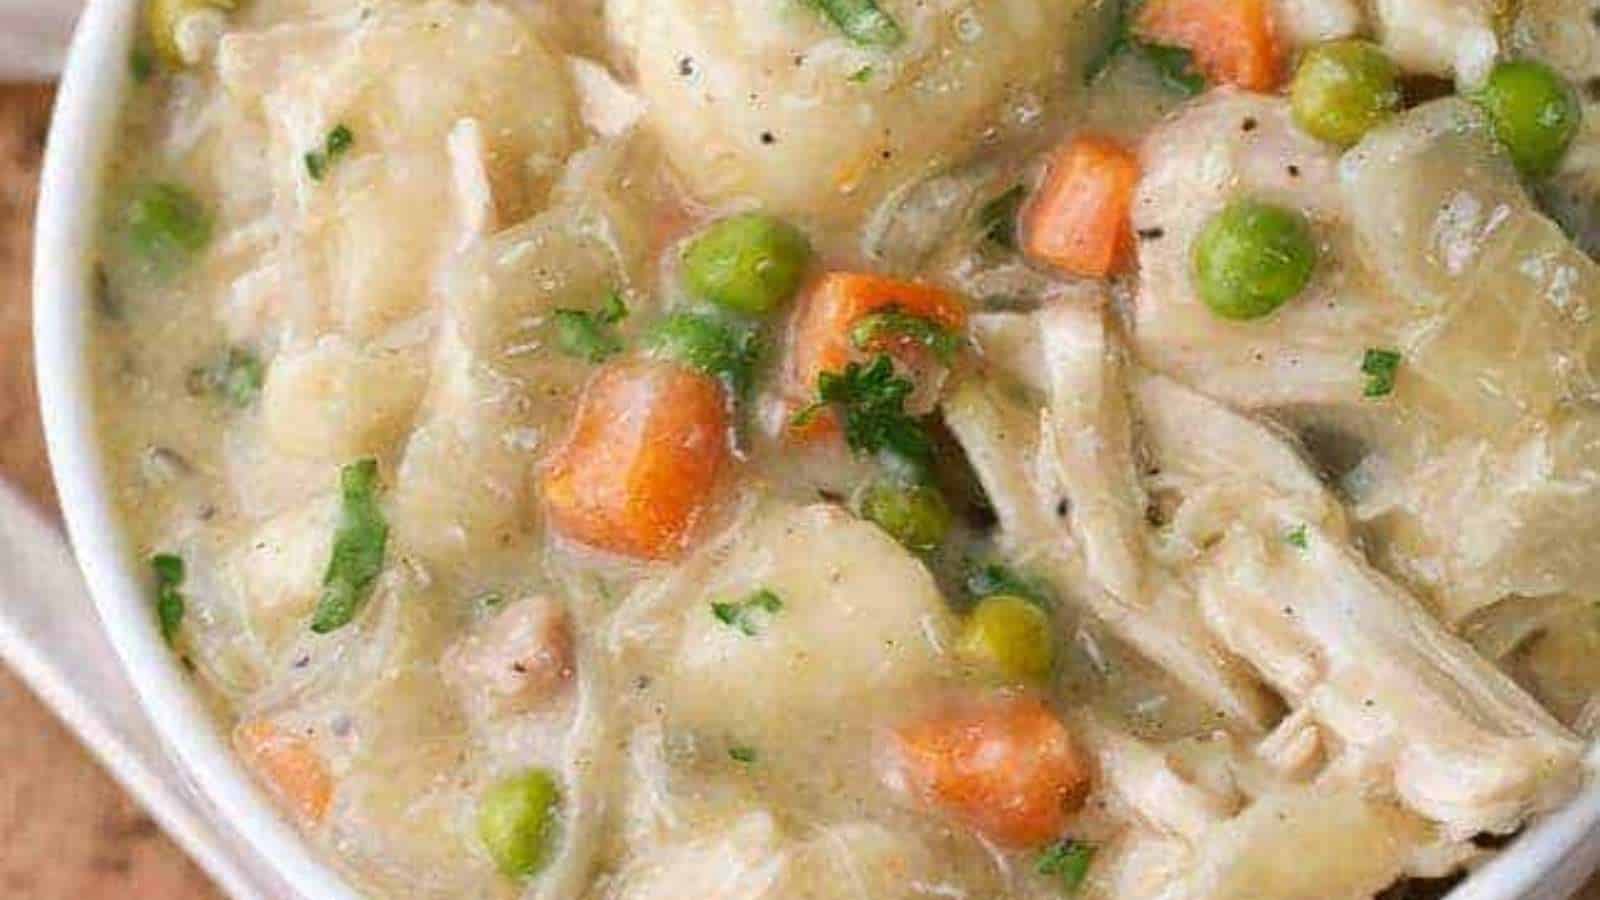 Chicken chowder in a white bowl with carrots and peas.